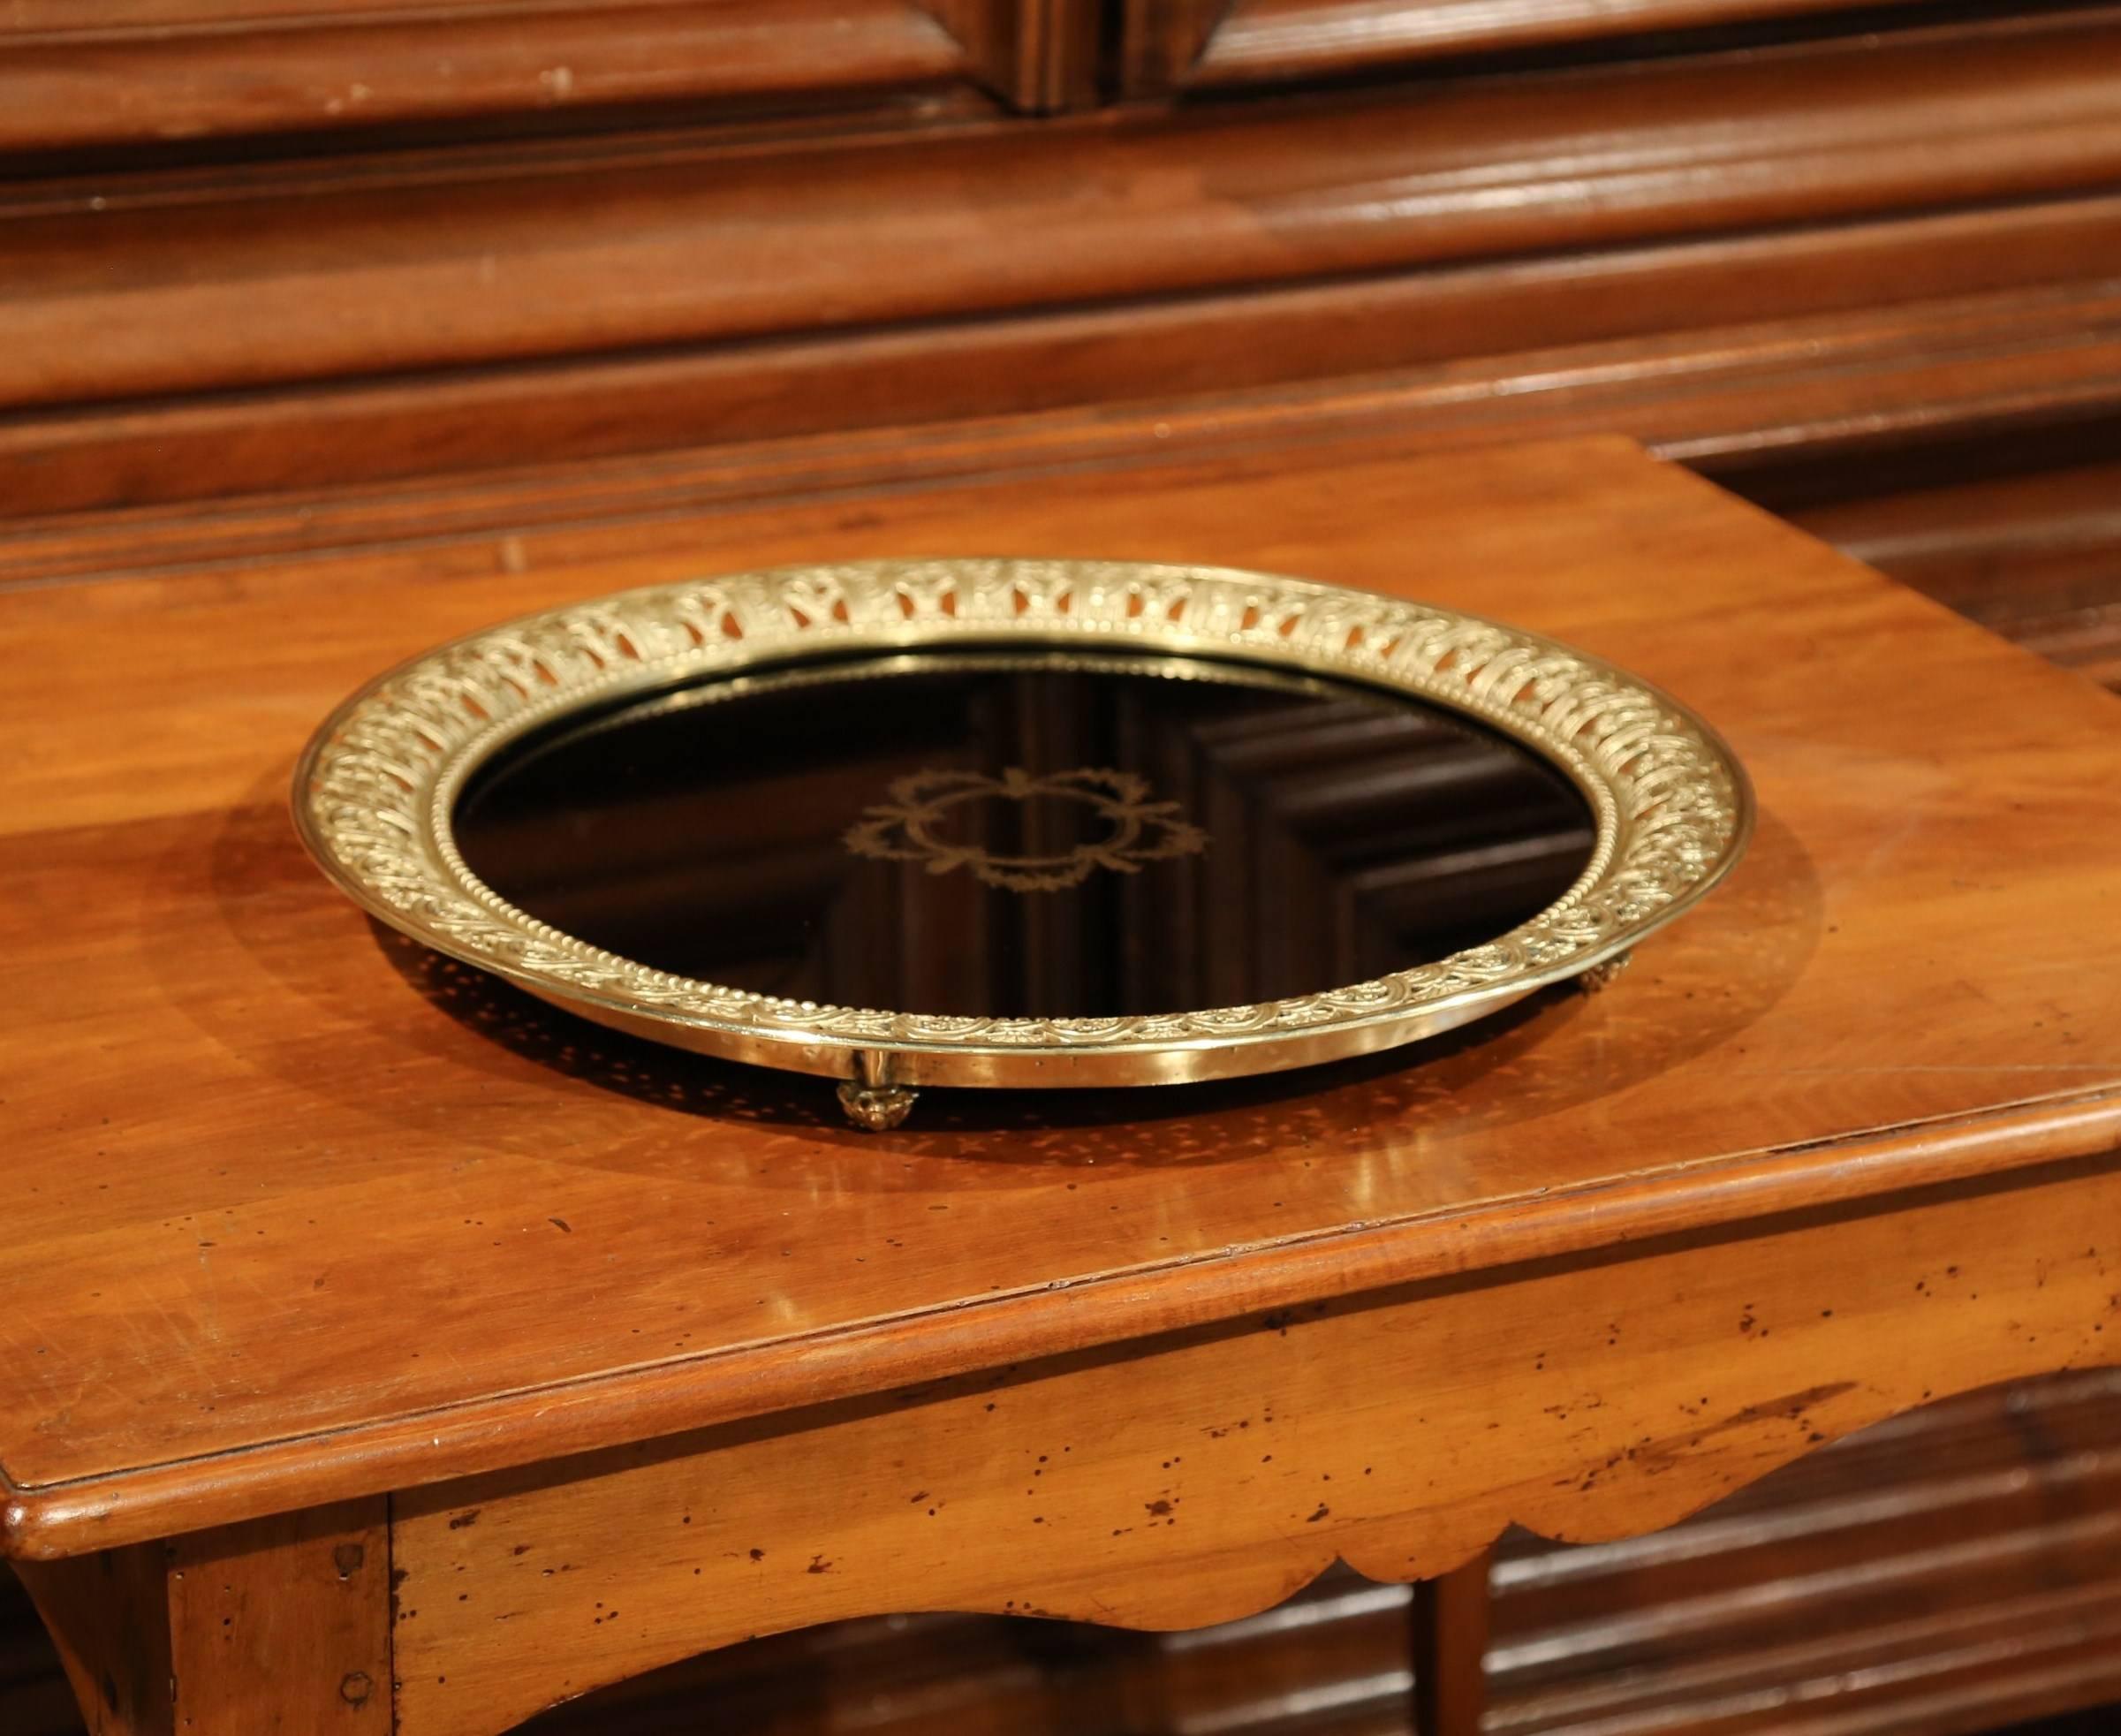 This elegant, antique tray was crafted in France, circa 1890. The Louis XVI plateau features an eye-catching black glass surface, decorated with gilt garlands and flowers in the centre. The round tray has an intricate bronze rim and four small feet.